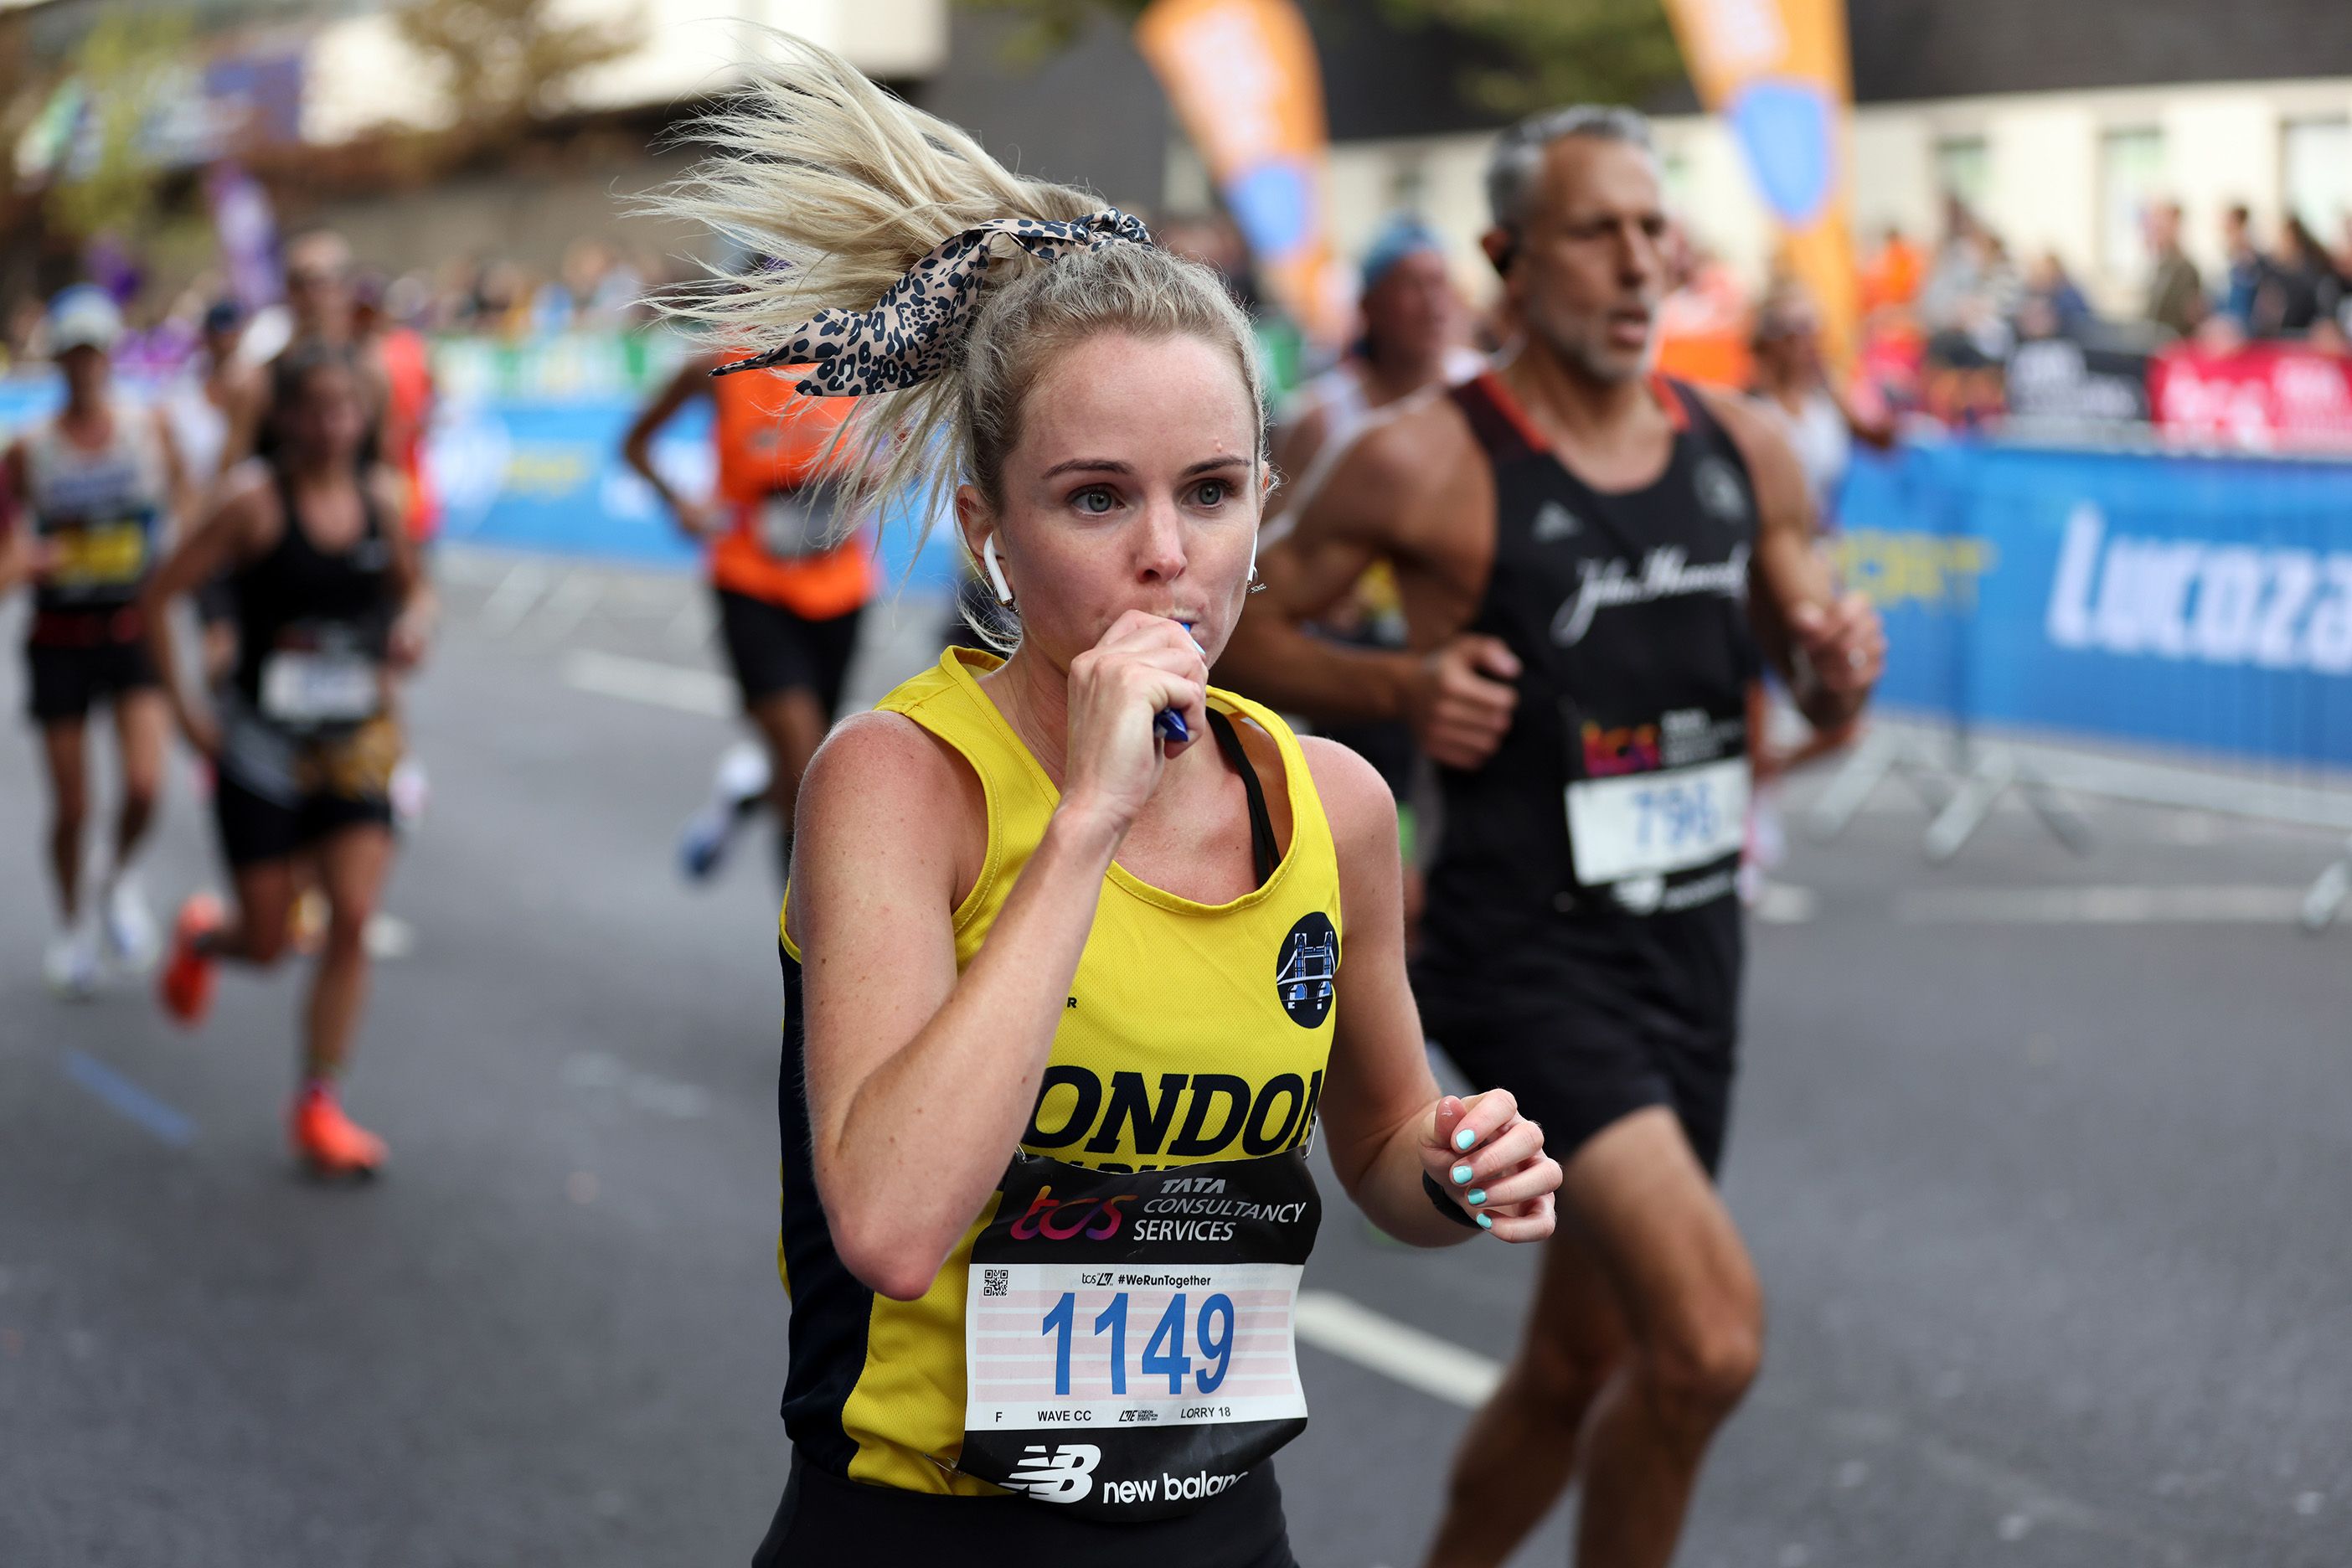 IV. Proper Nutrition for Marathon Runners: Fueling Your Body